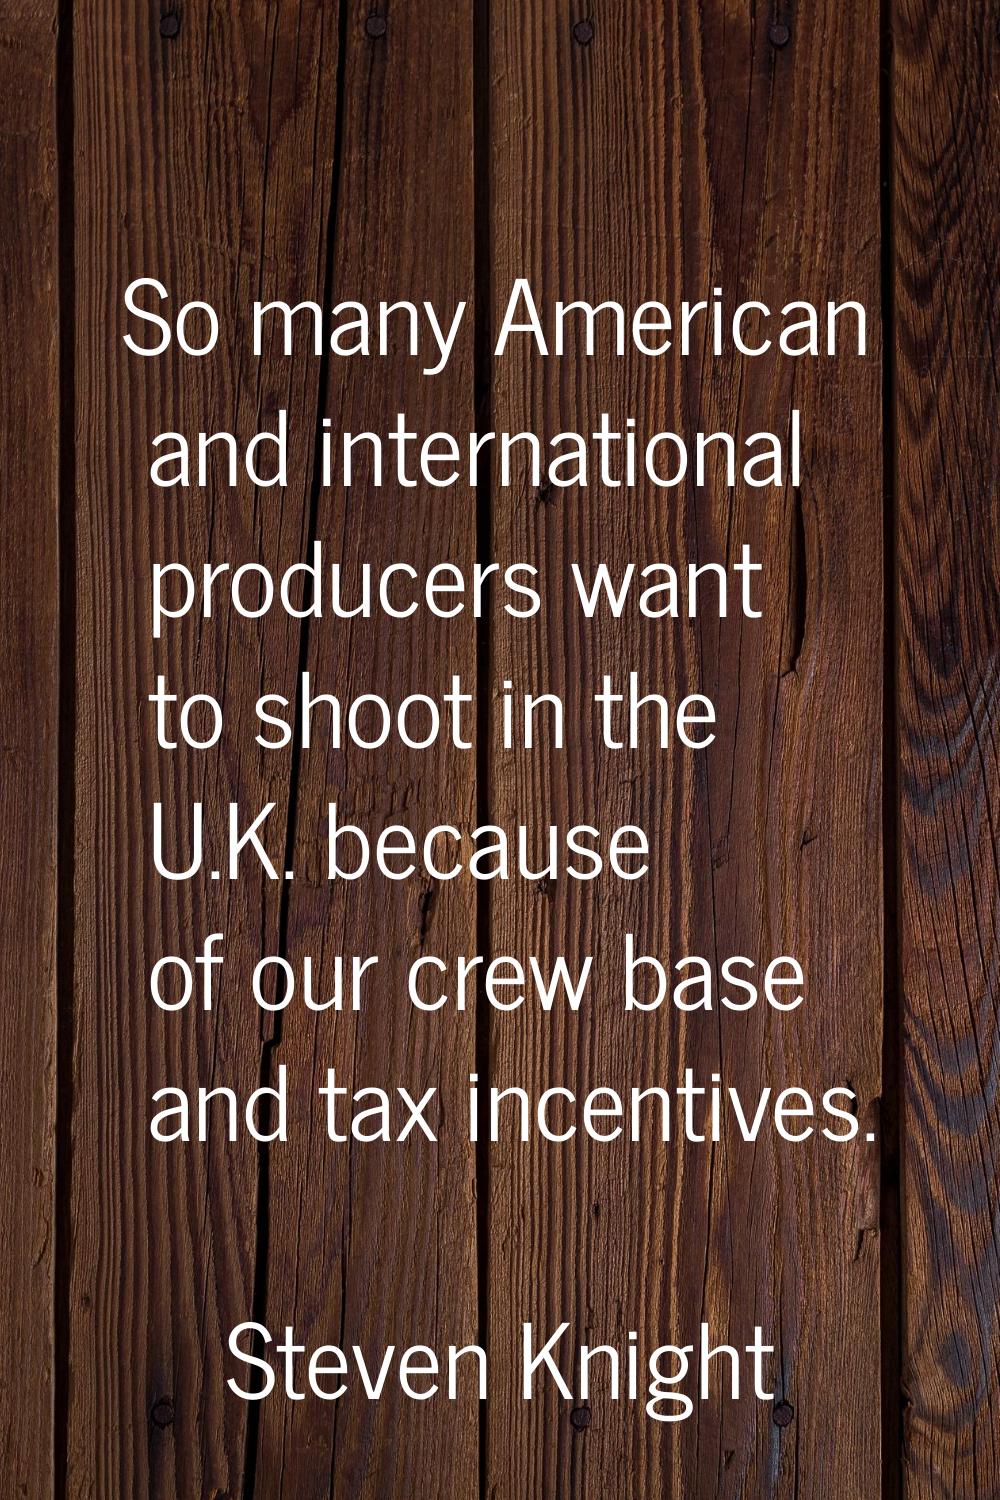 So many American and international producers want to shoot in the U.K. because of our crew base and